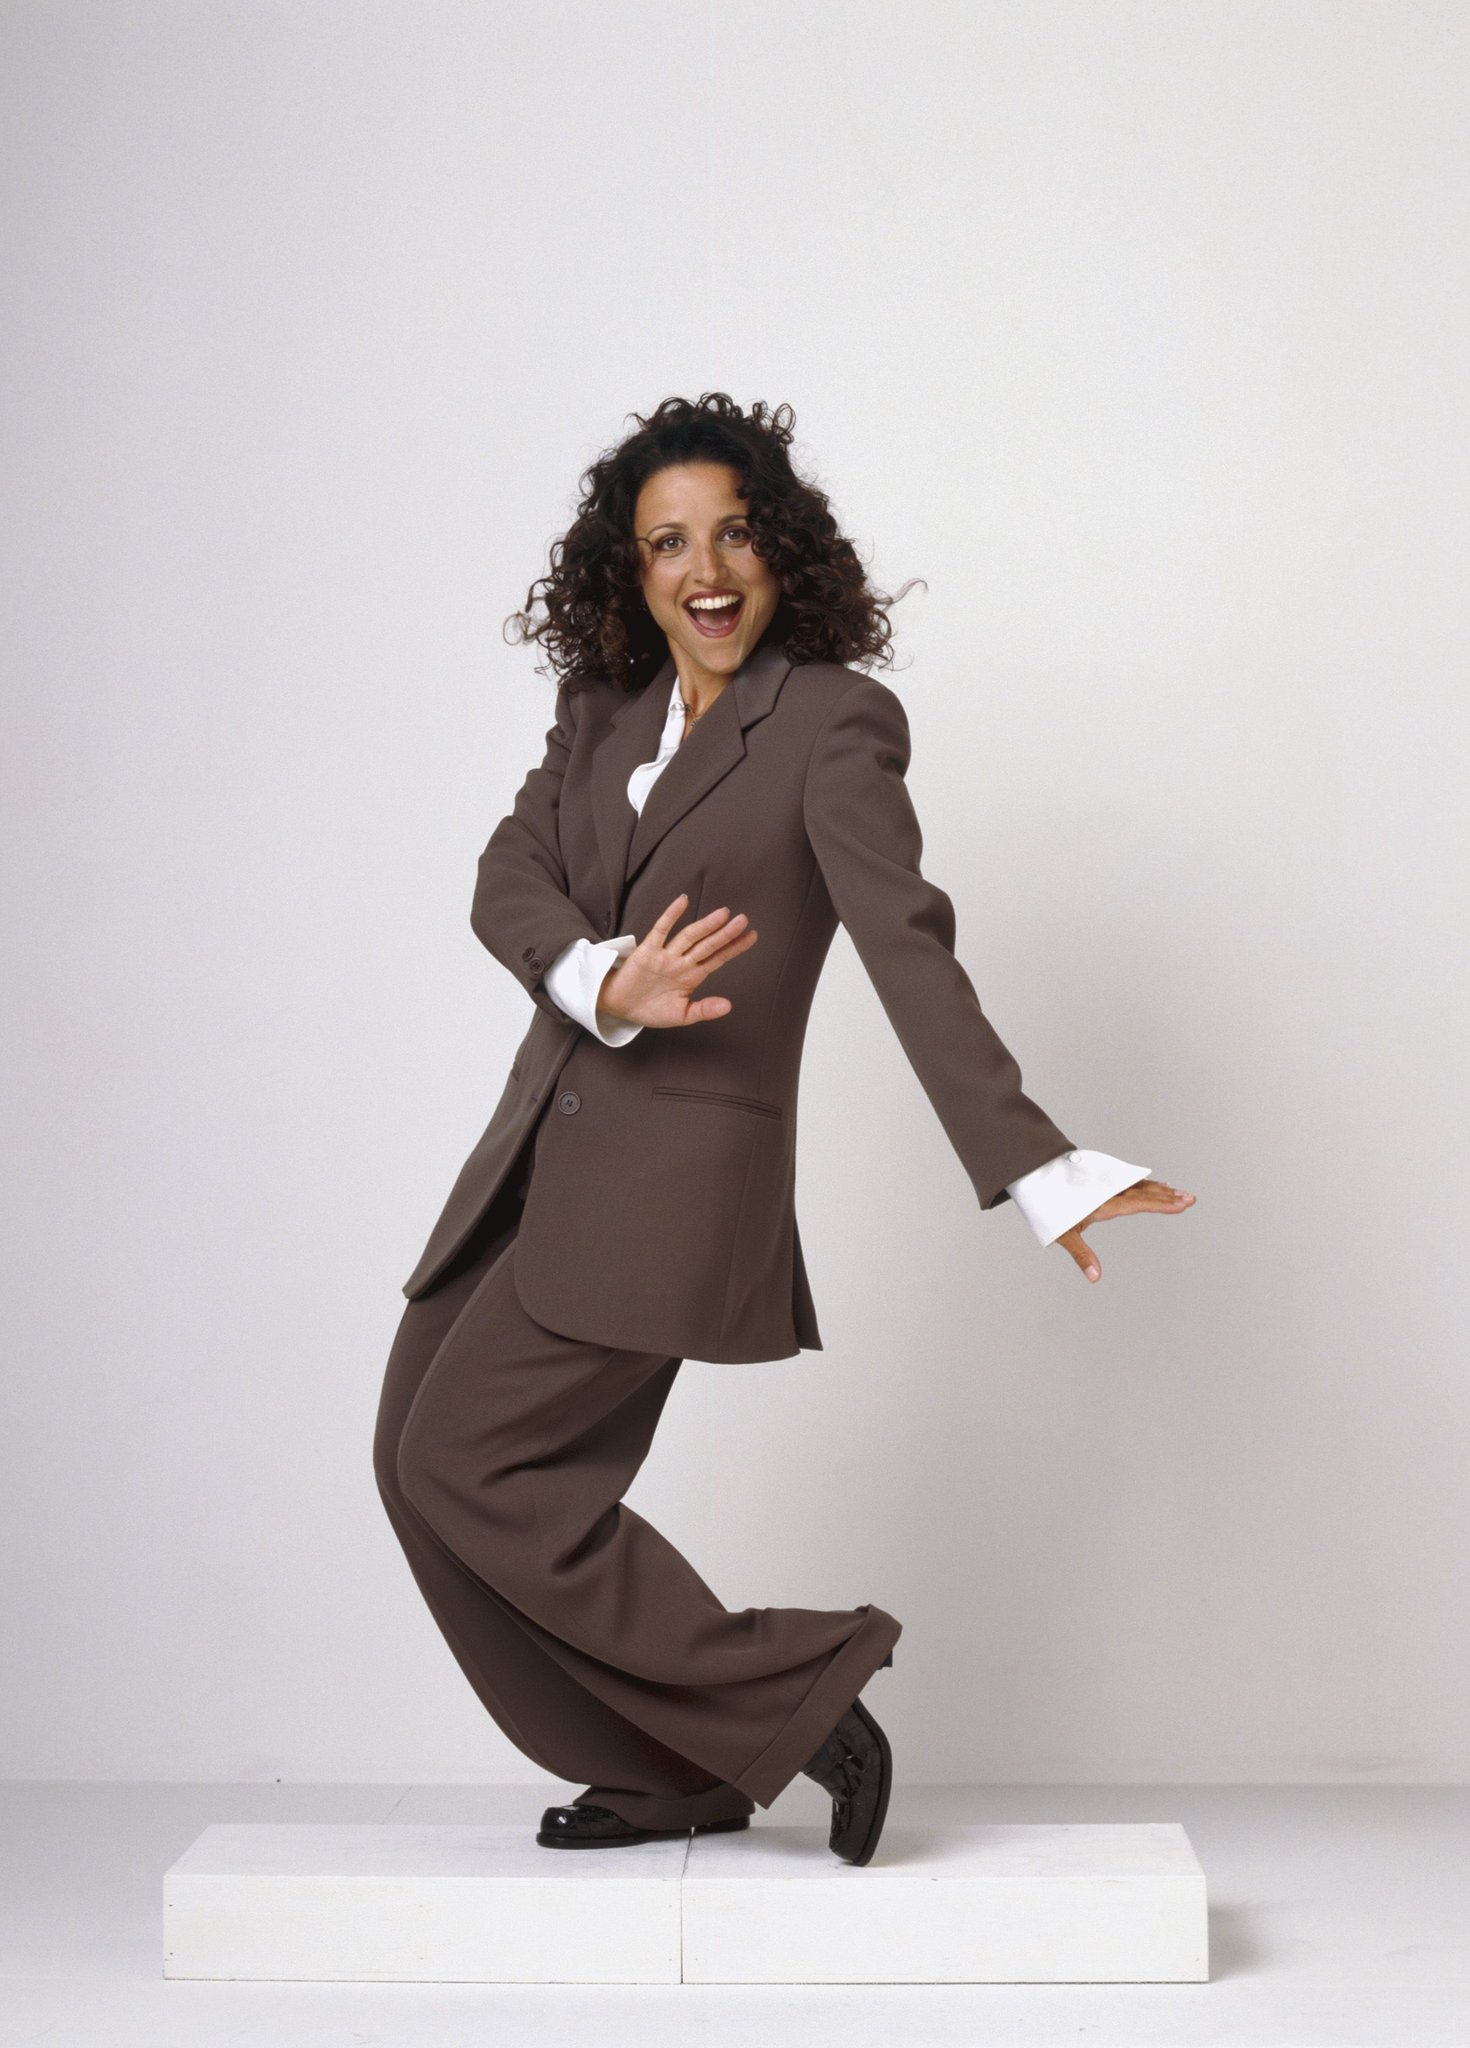 Happy Birthday to the great Julia Louis-Dreyfus! 